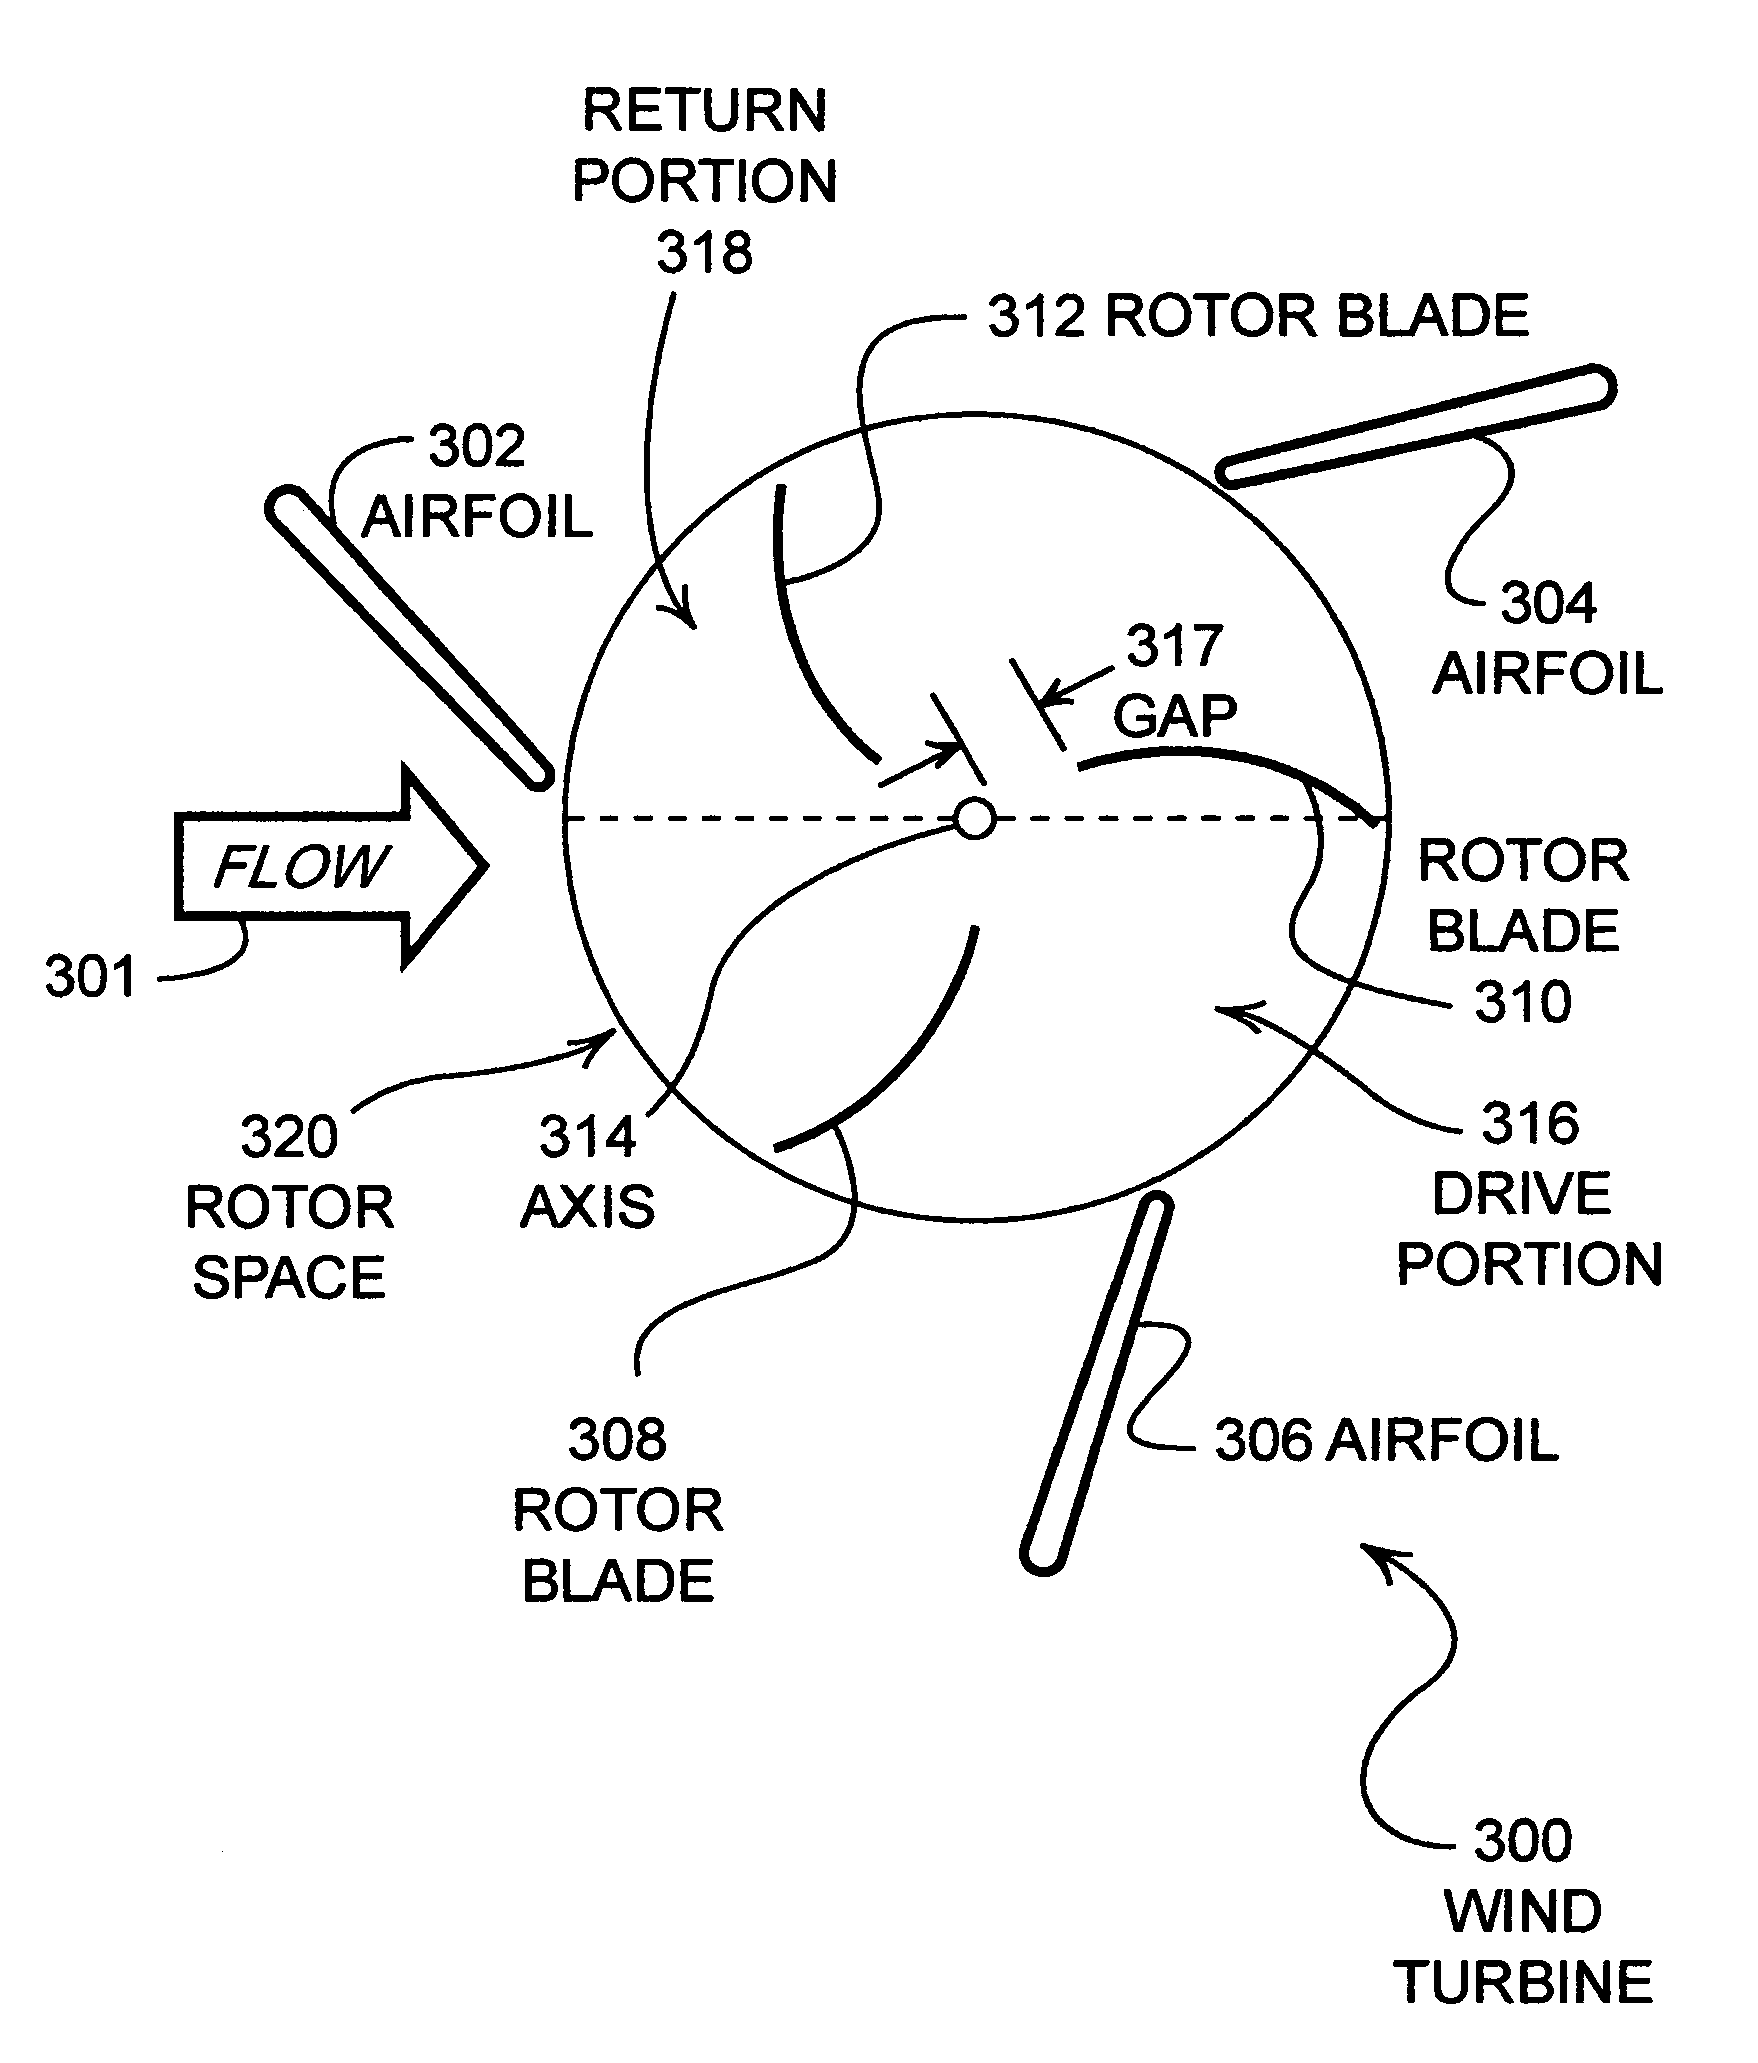 Wind turbine having airfoils for blocking and directing wind and rotors with or without a central gap